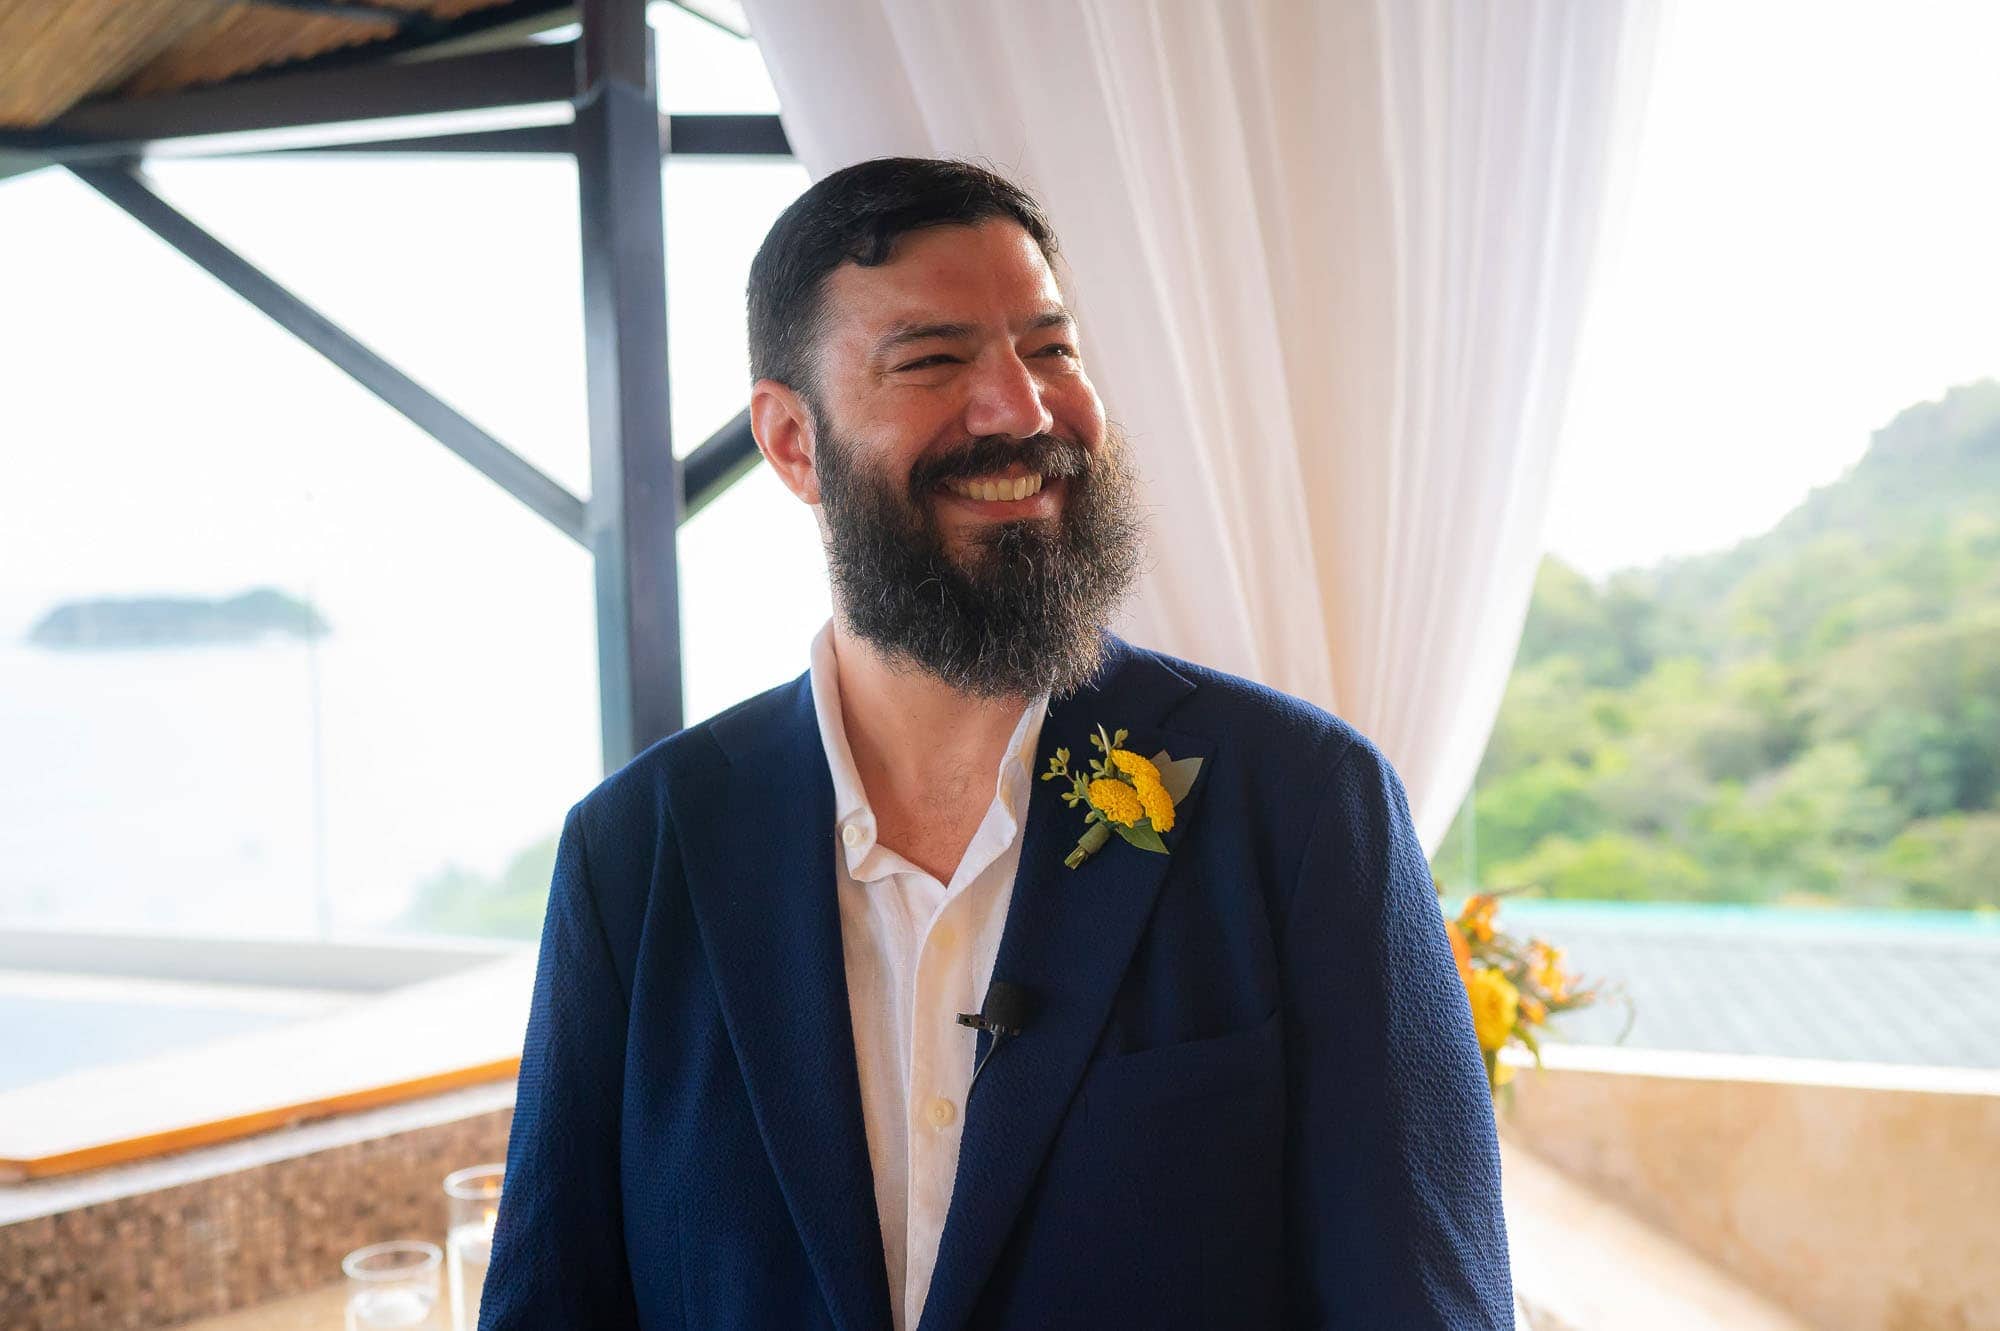 The groom smiling at his bride